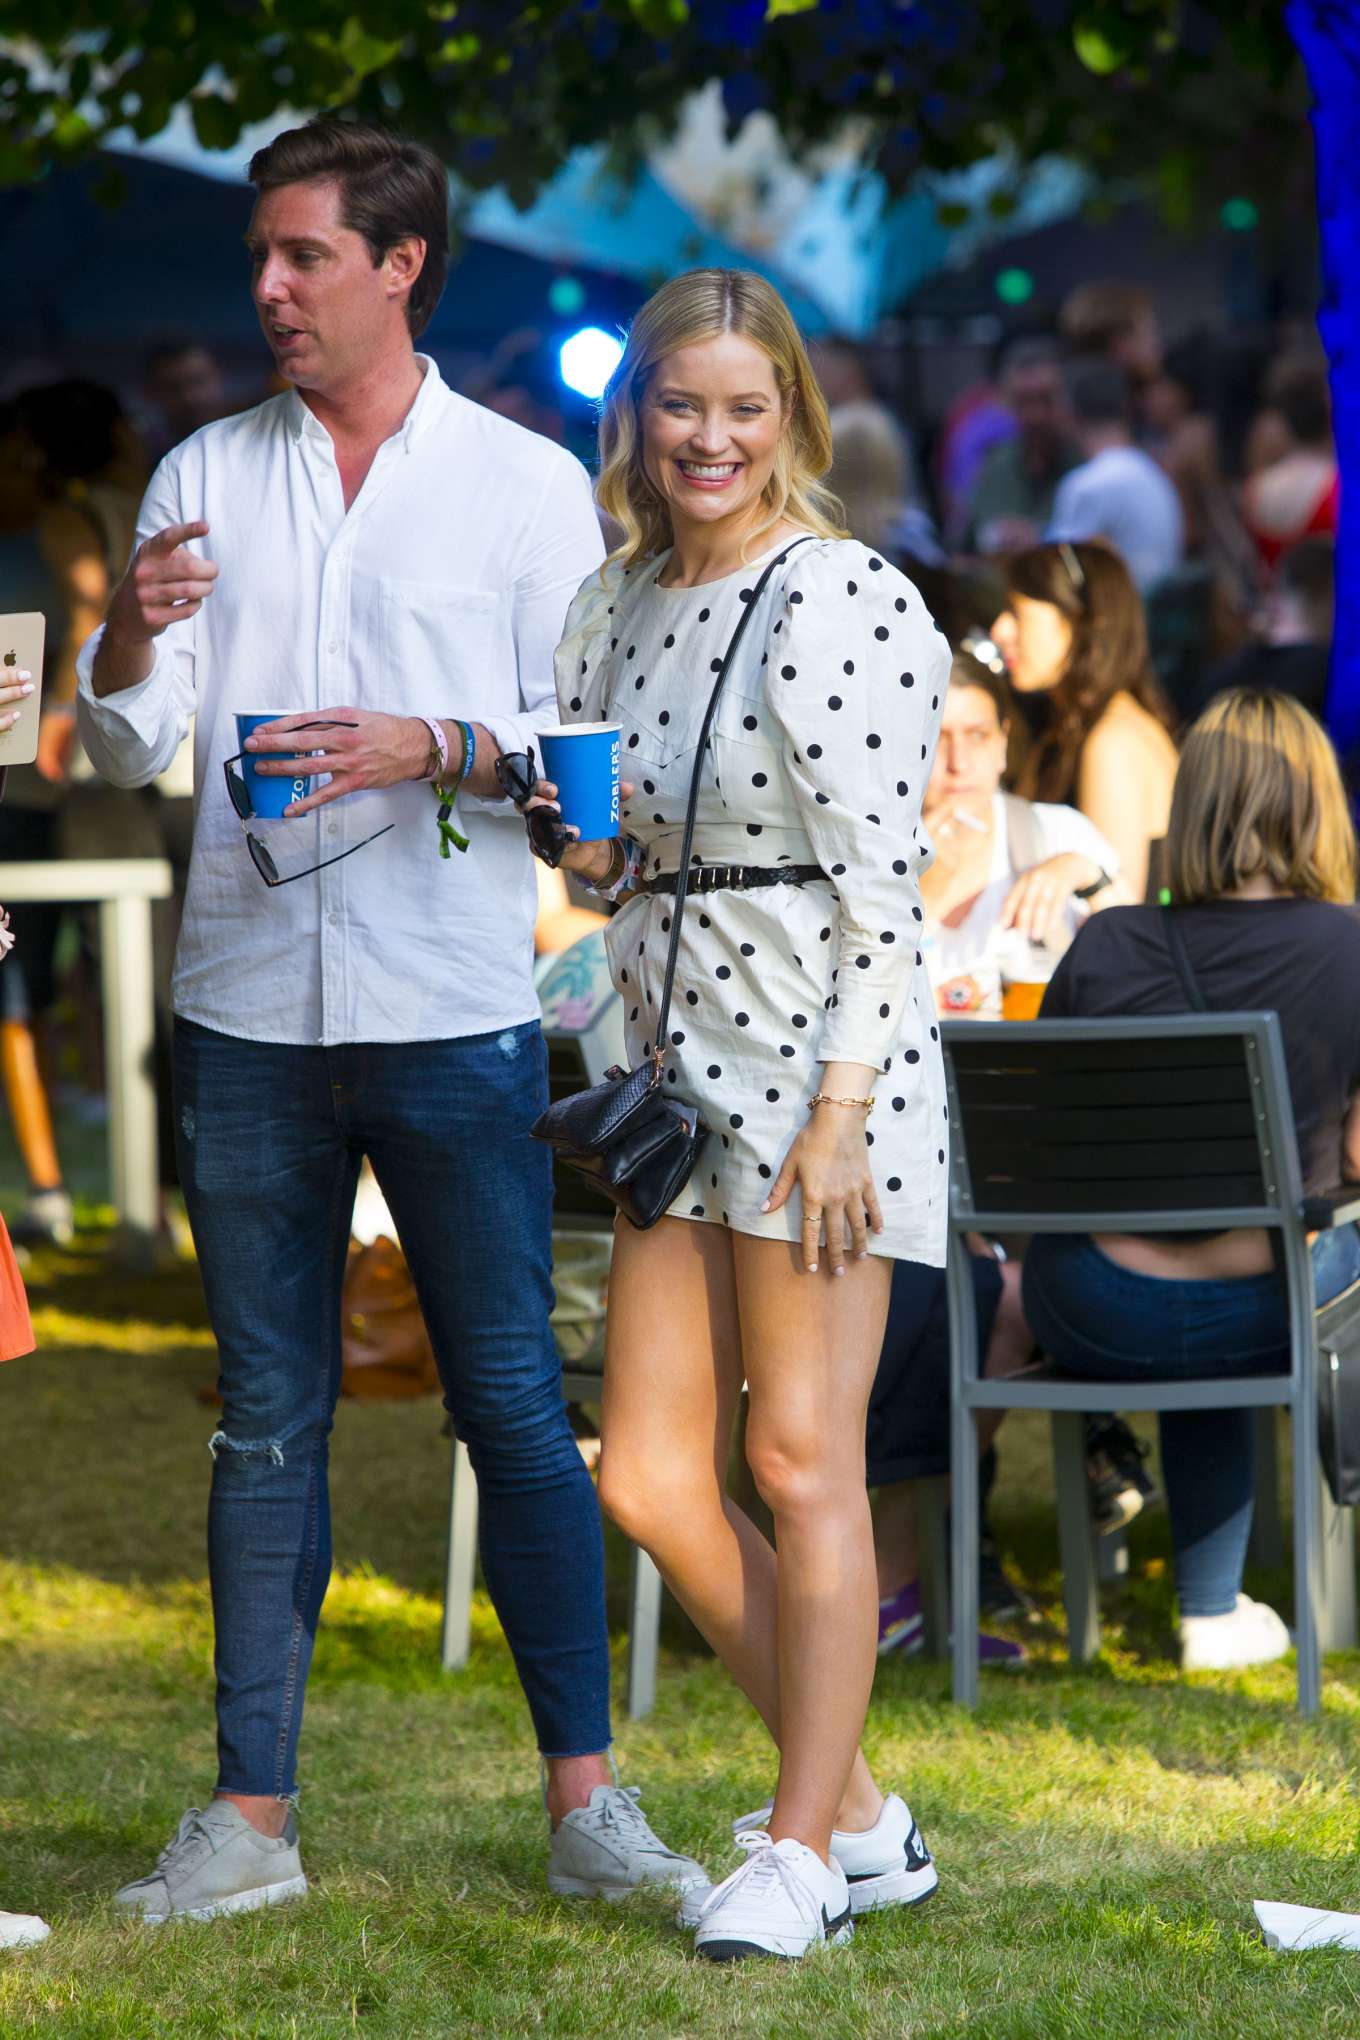 Laura Whitmore in White Polkadot Mini Dress at British Summer Time in Hyde Park